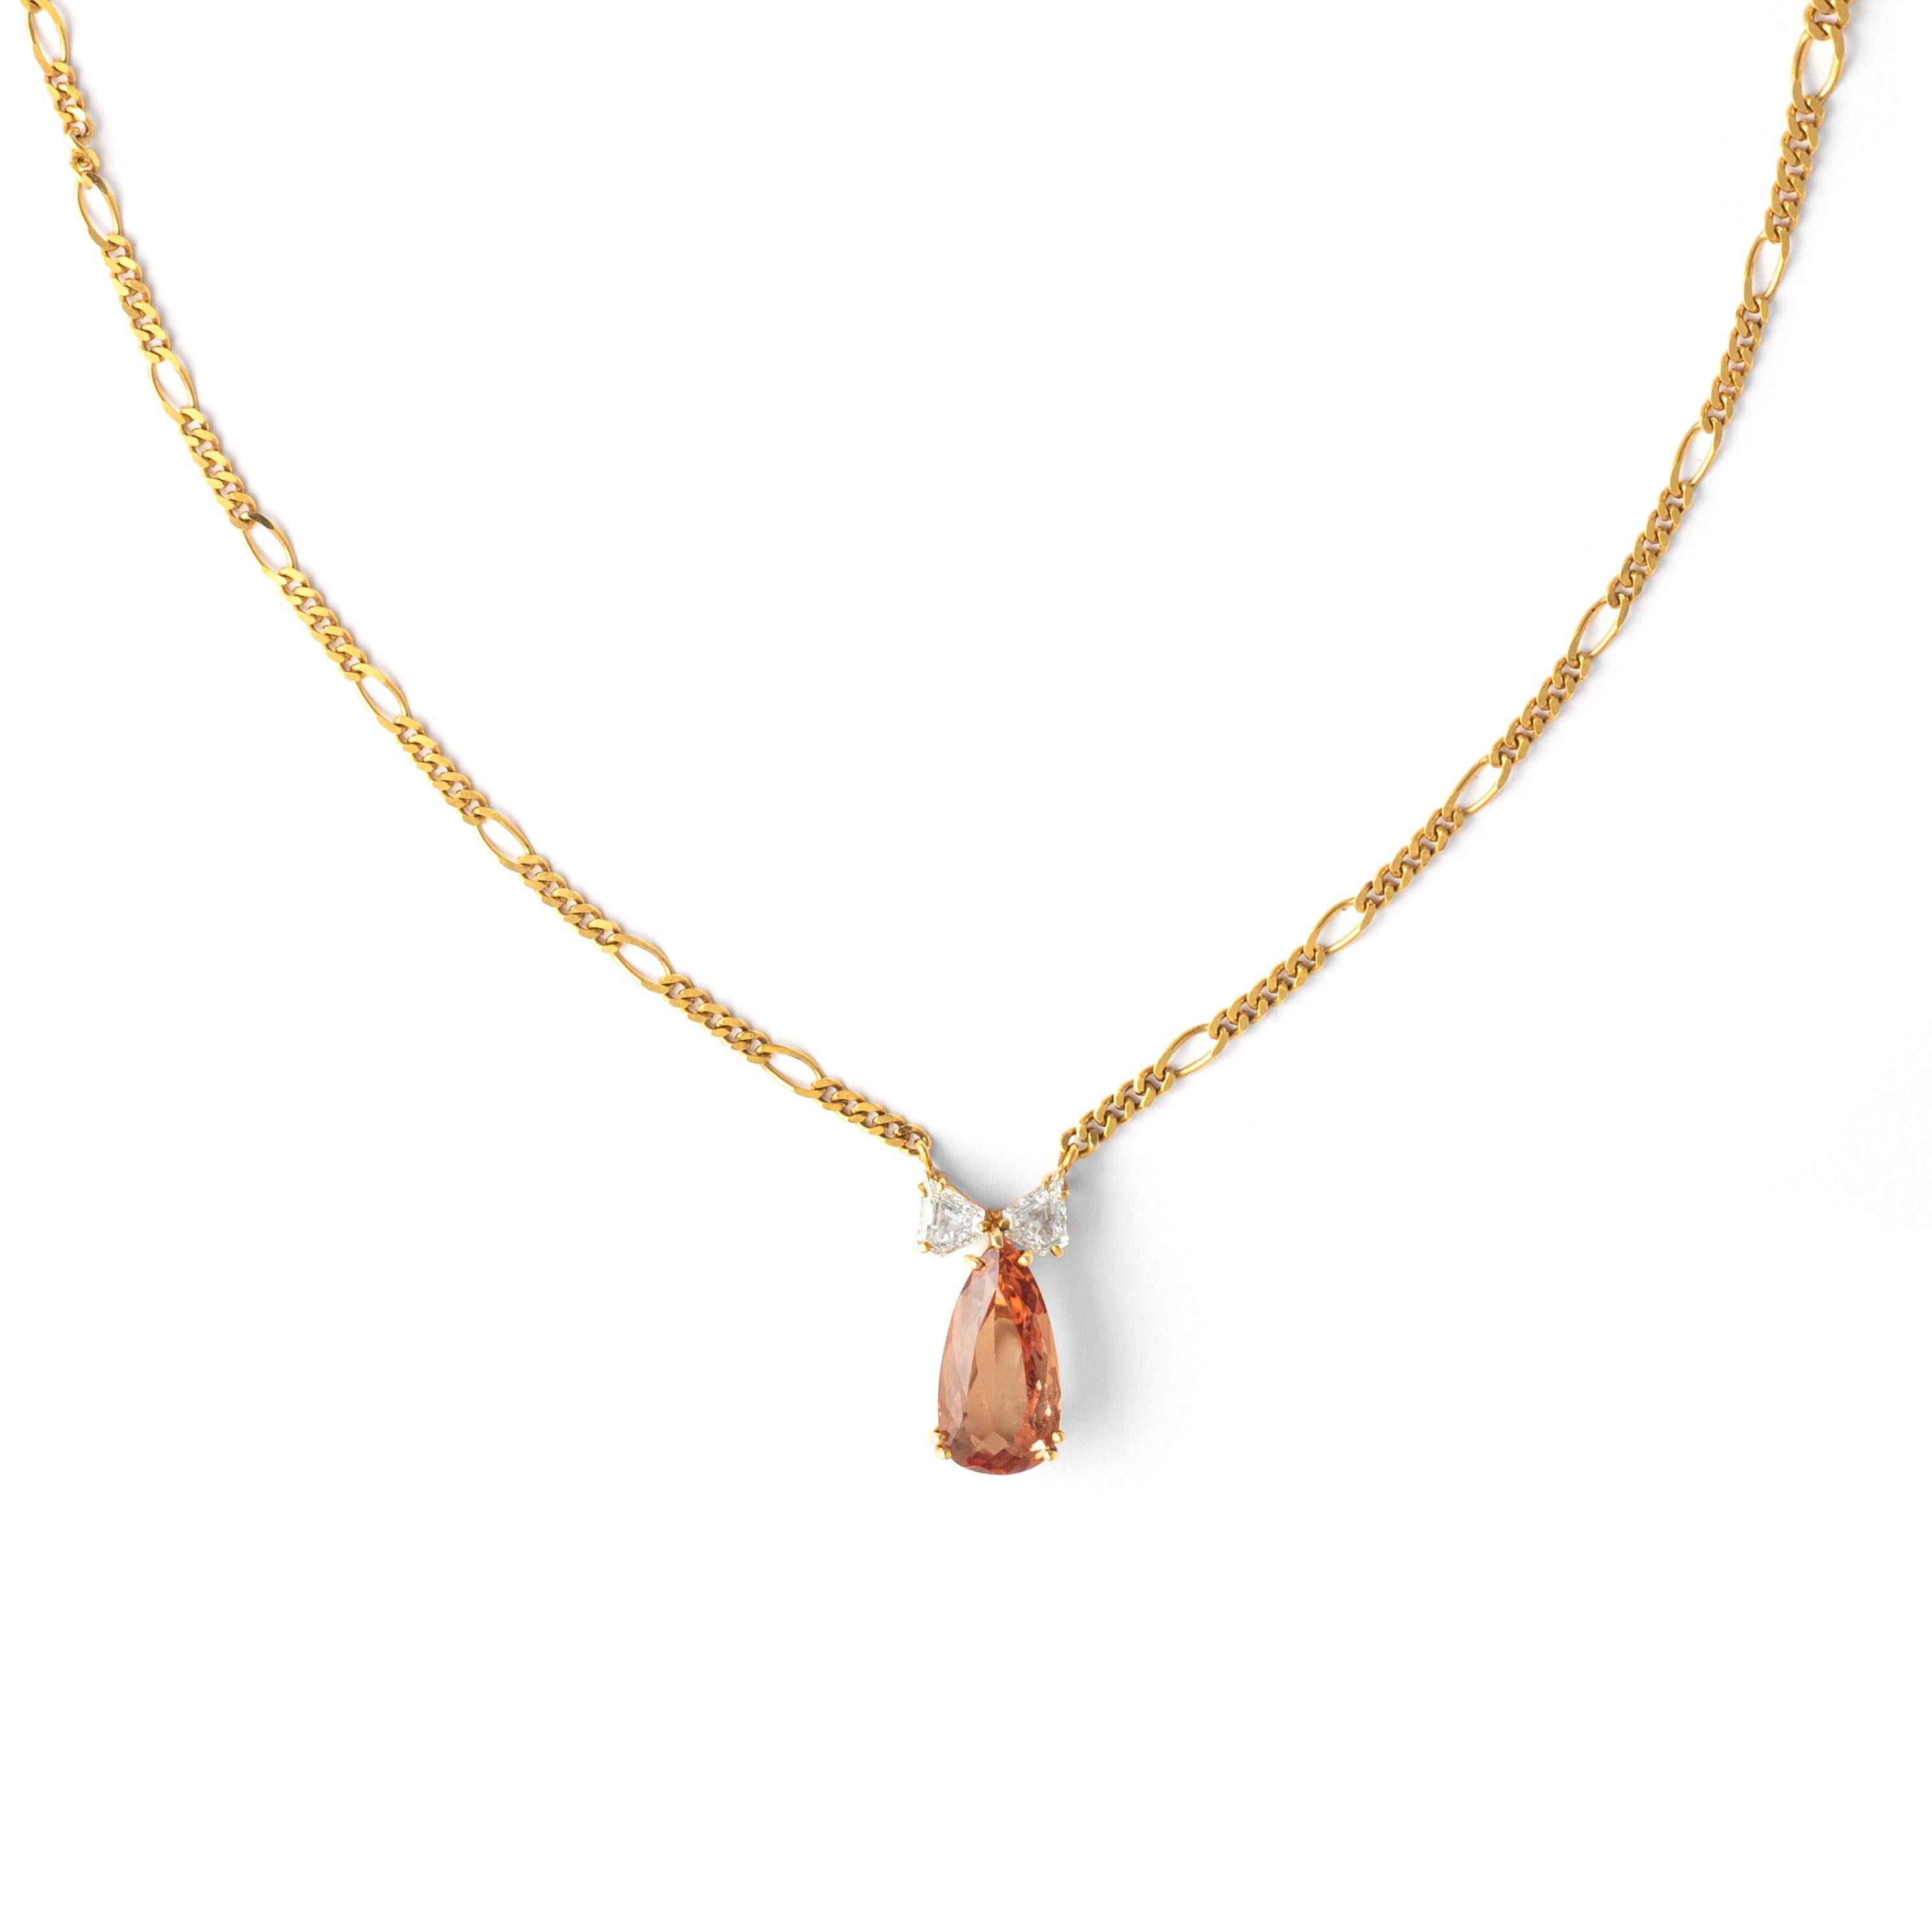 Indulge in the exquisite allure of our Topaz Diamond Pendant Chain Necklace - a radiant statement piece that captures attention with its timeless elegance.

Suspended from a delicate chain, the centerpiece features a resplendent topaz weighing 3.62